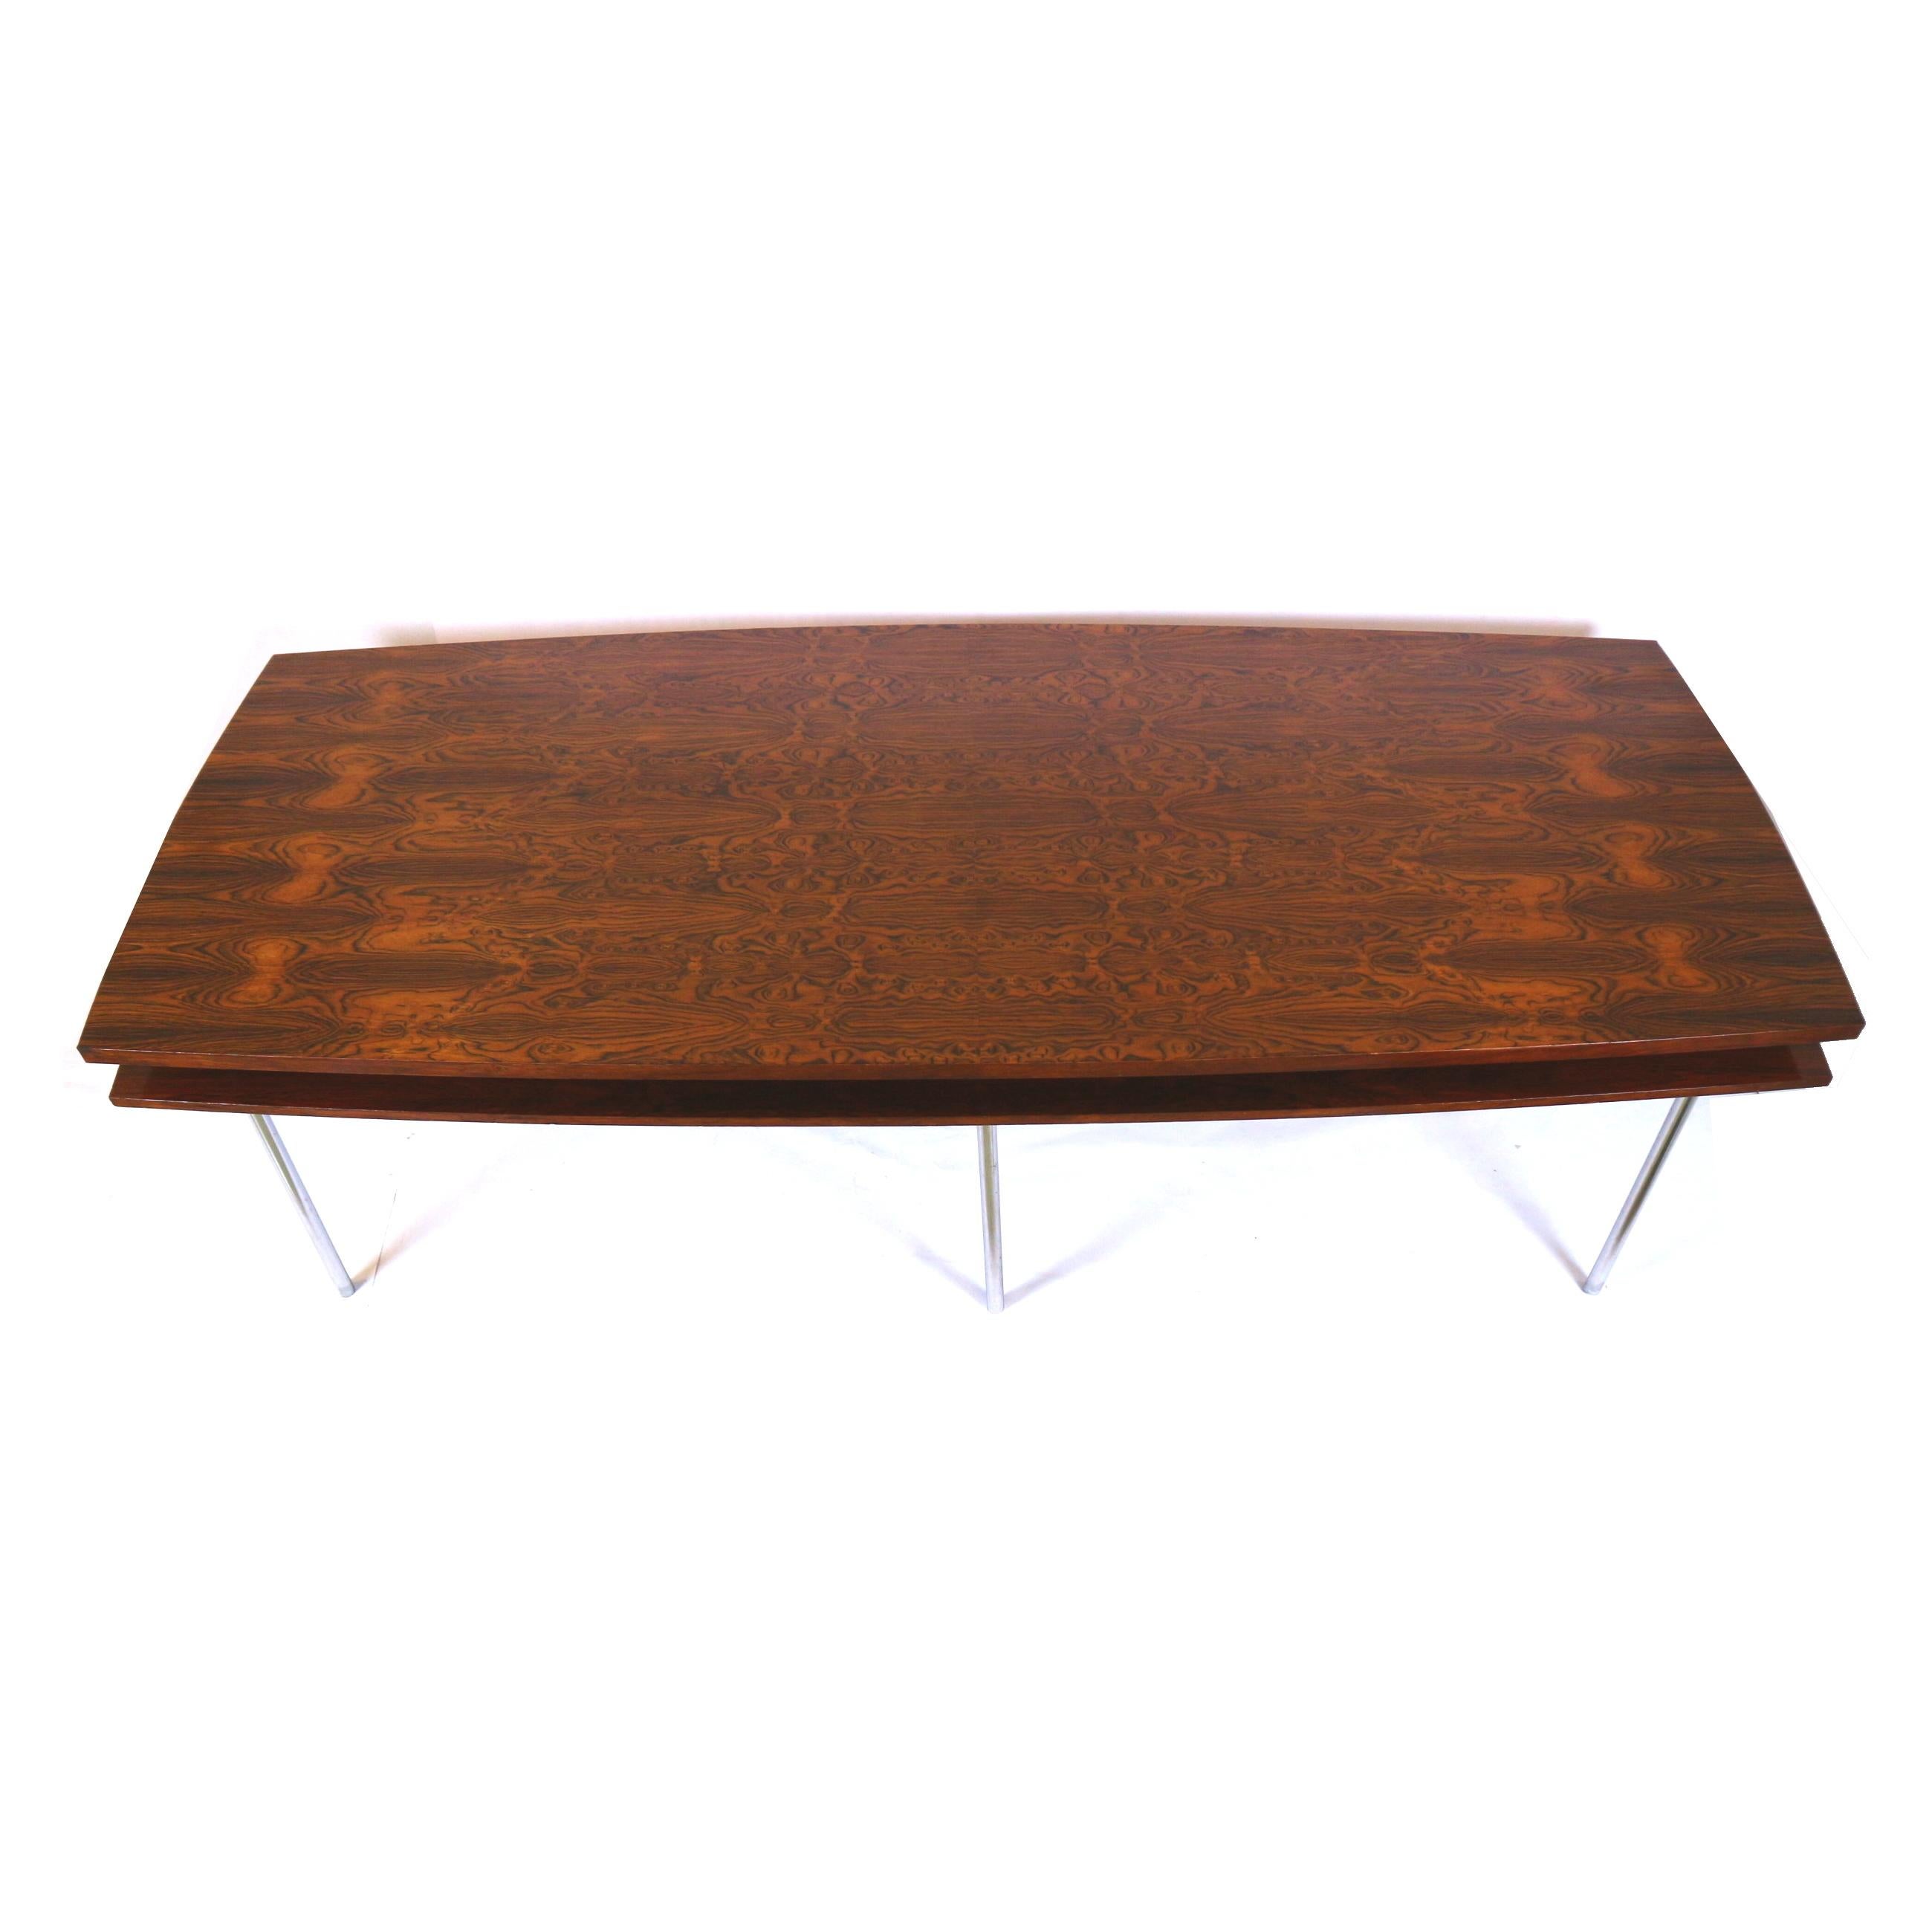 Large vintage rosewood conference table / dining table made in the 1960s For Sale 3